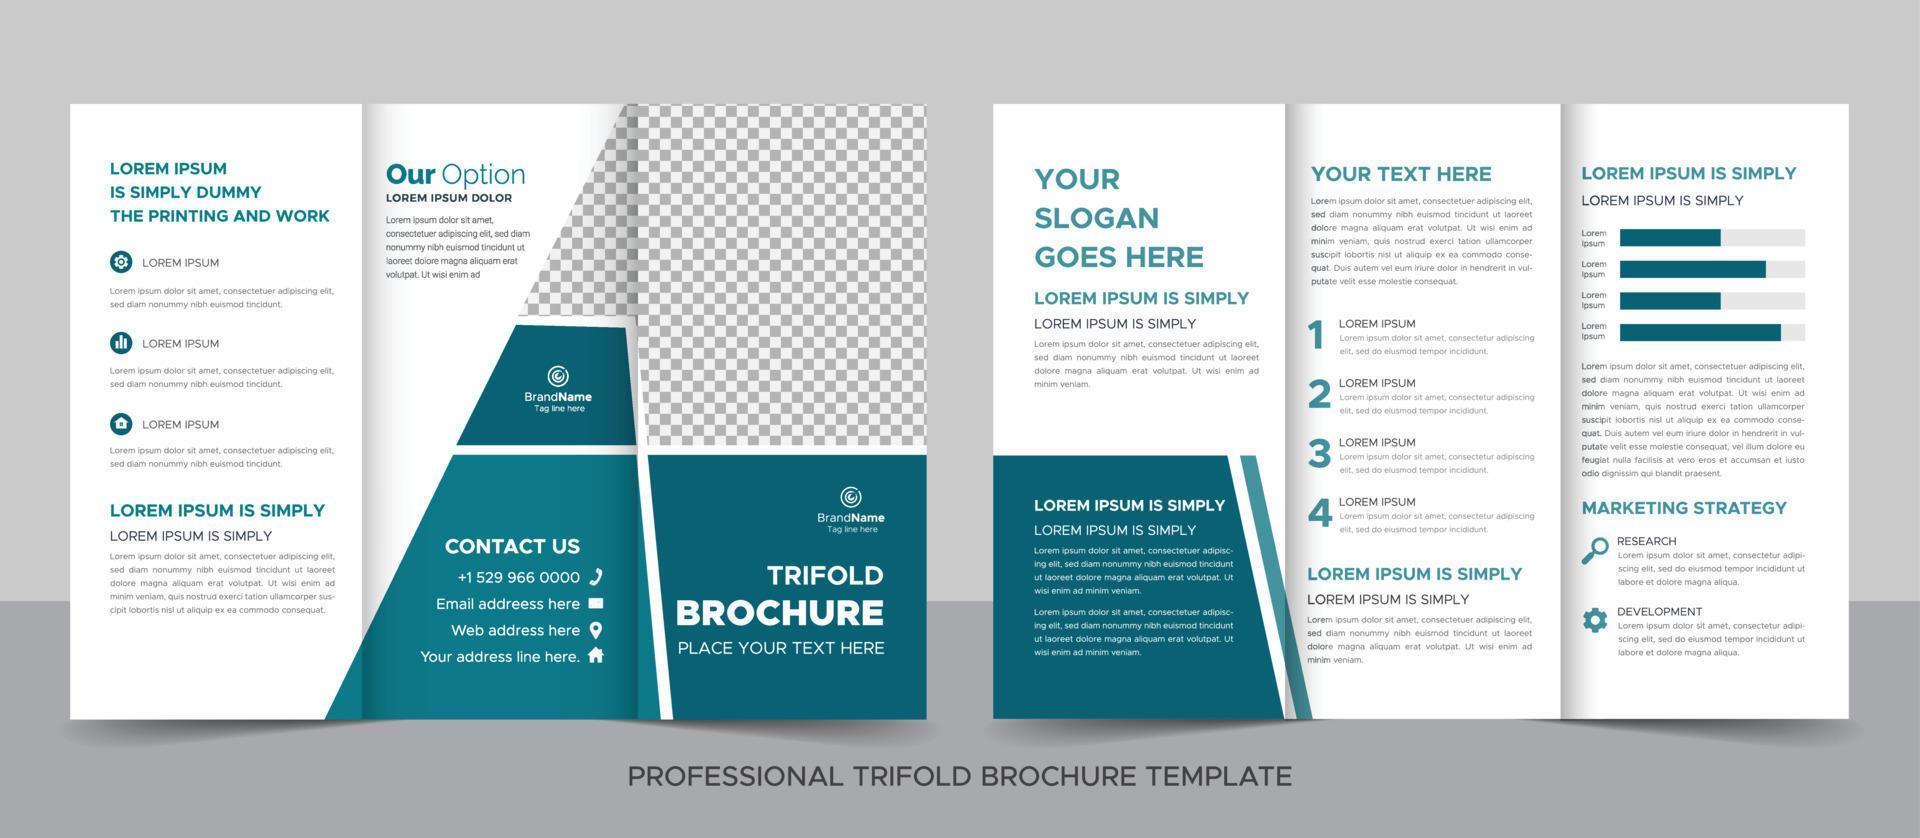 Trifold Brochure Design Template for Your Company, Corporate, Business, Advertising, Marketing, Agency, And Internet Business. vector